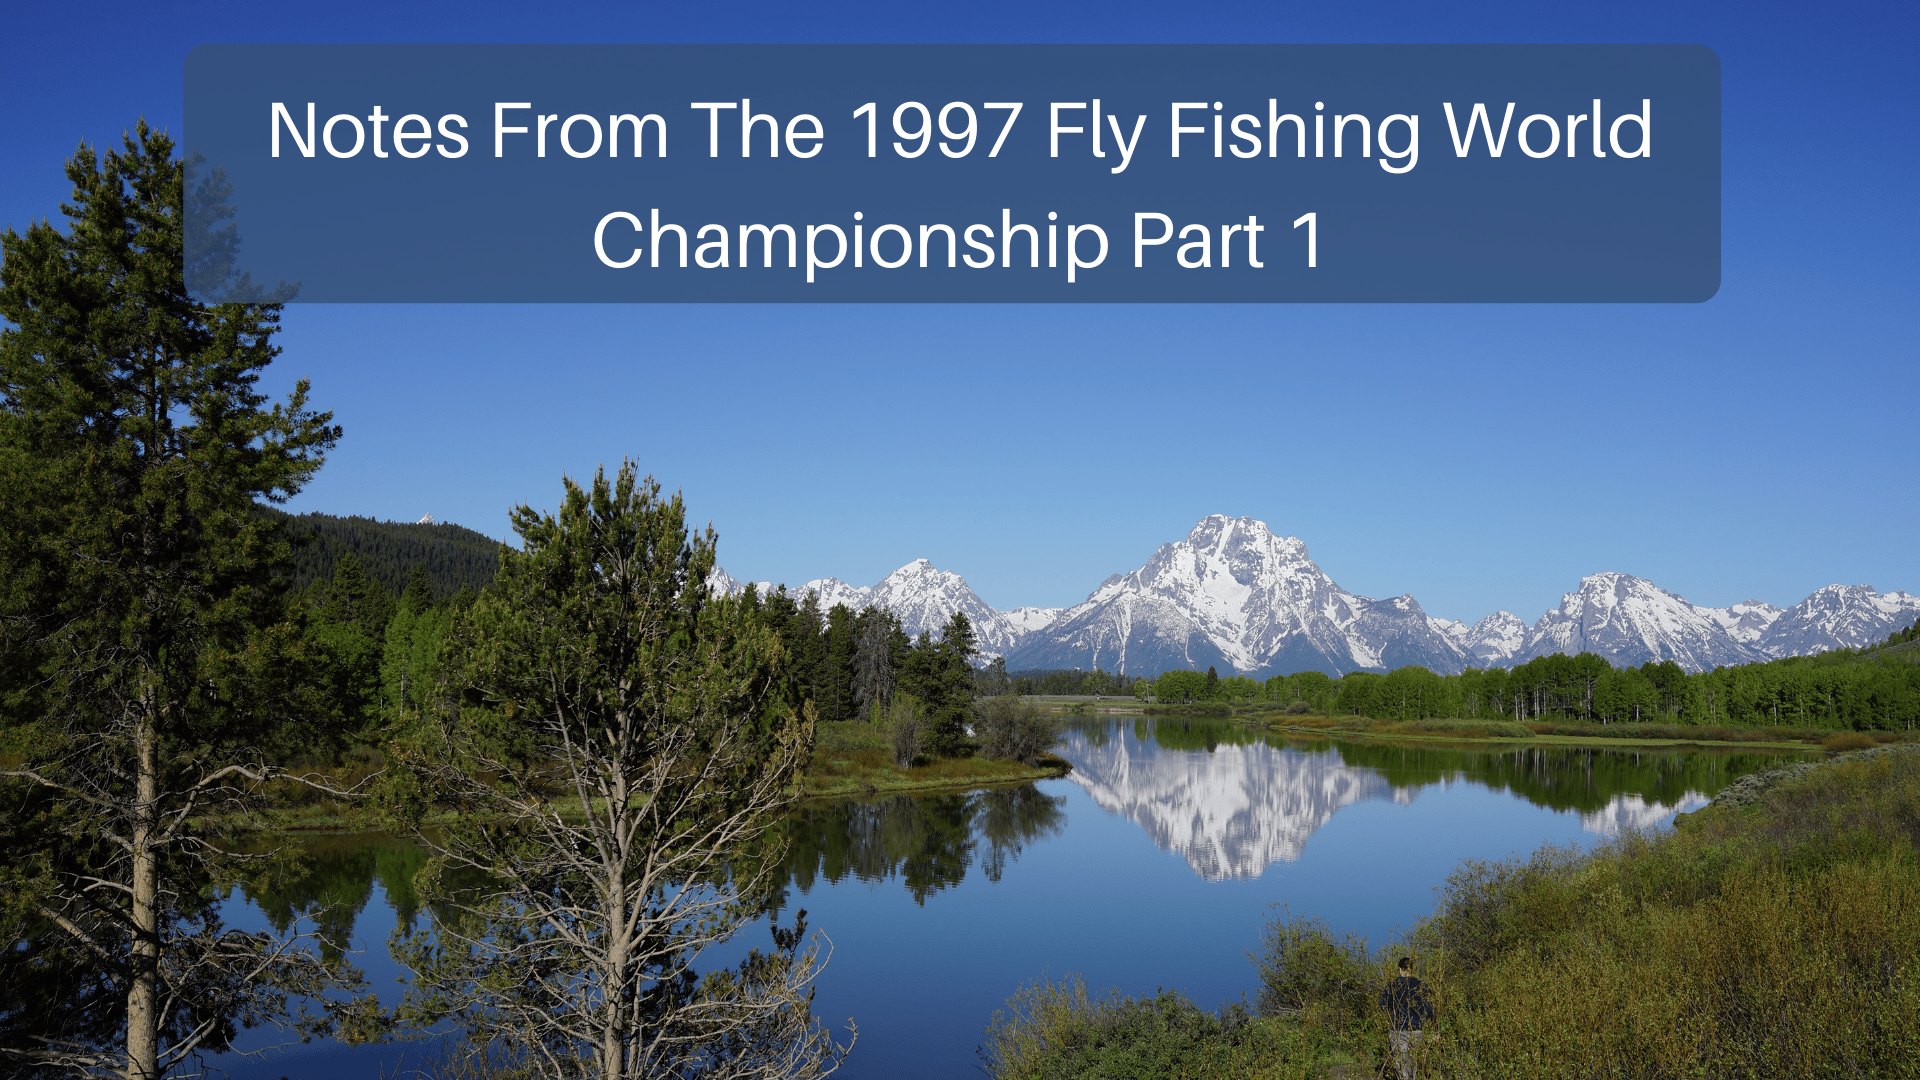 Notes From The 1997 Fly Fishing World Championship Part 1